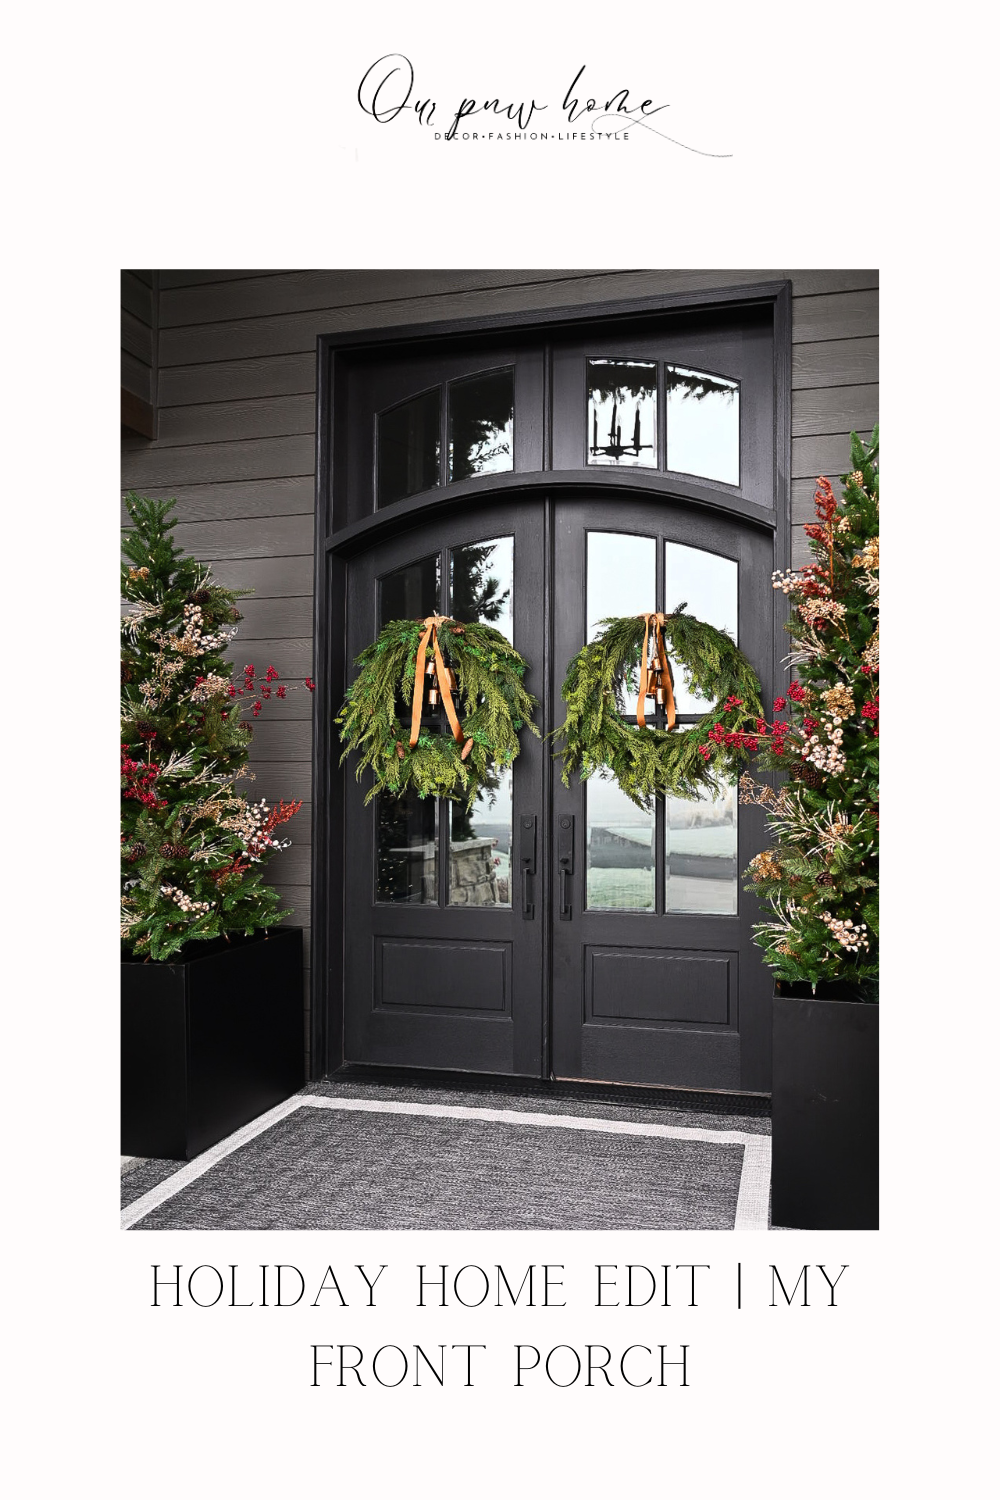 holiday home edit | my front porch | #holiday #holidayhome #holidayhomeedit #frontporch #christmas